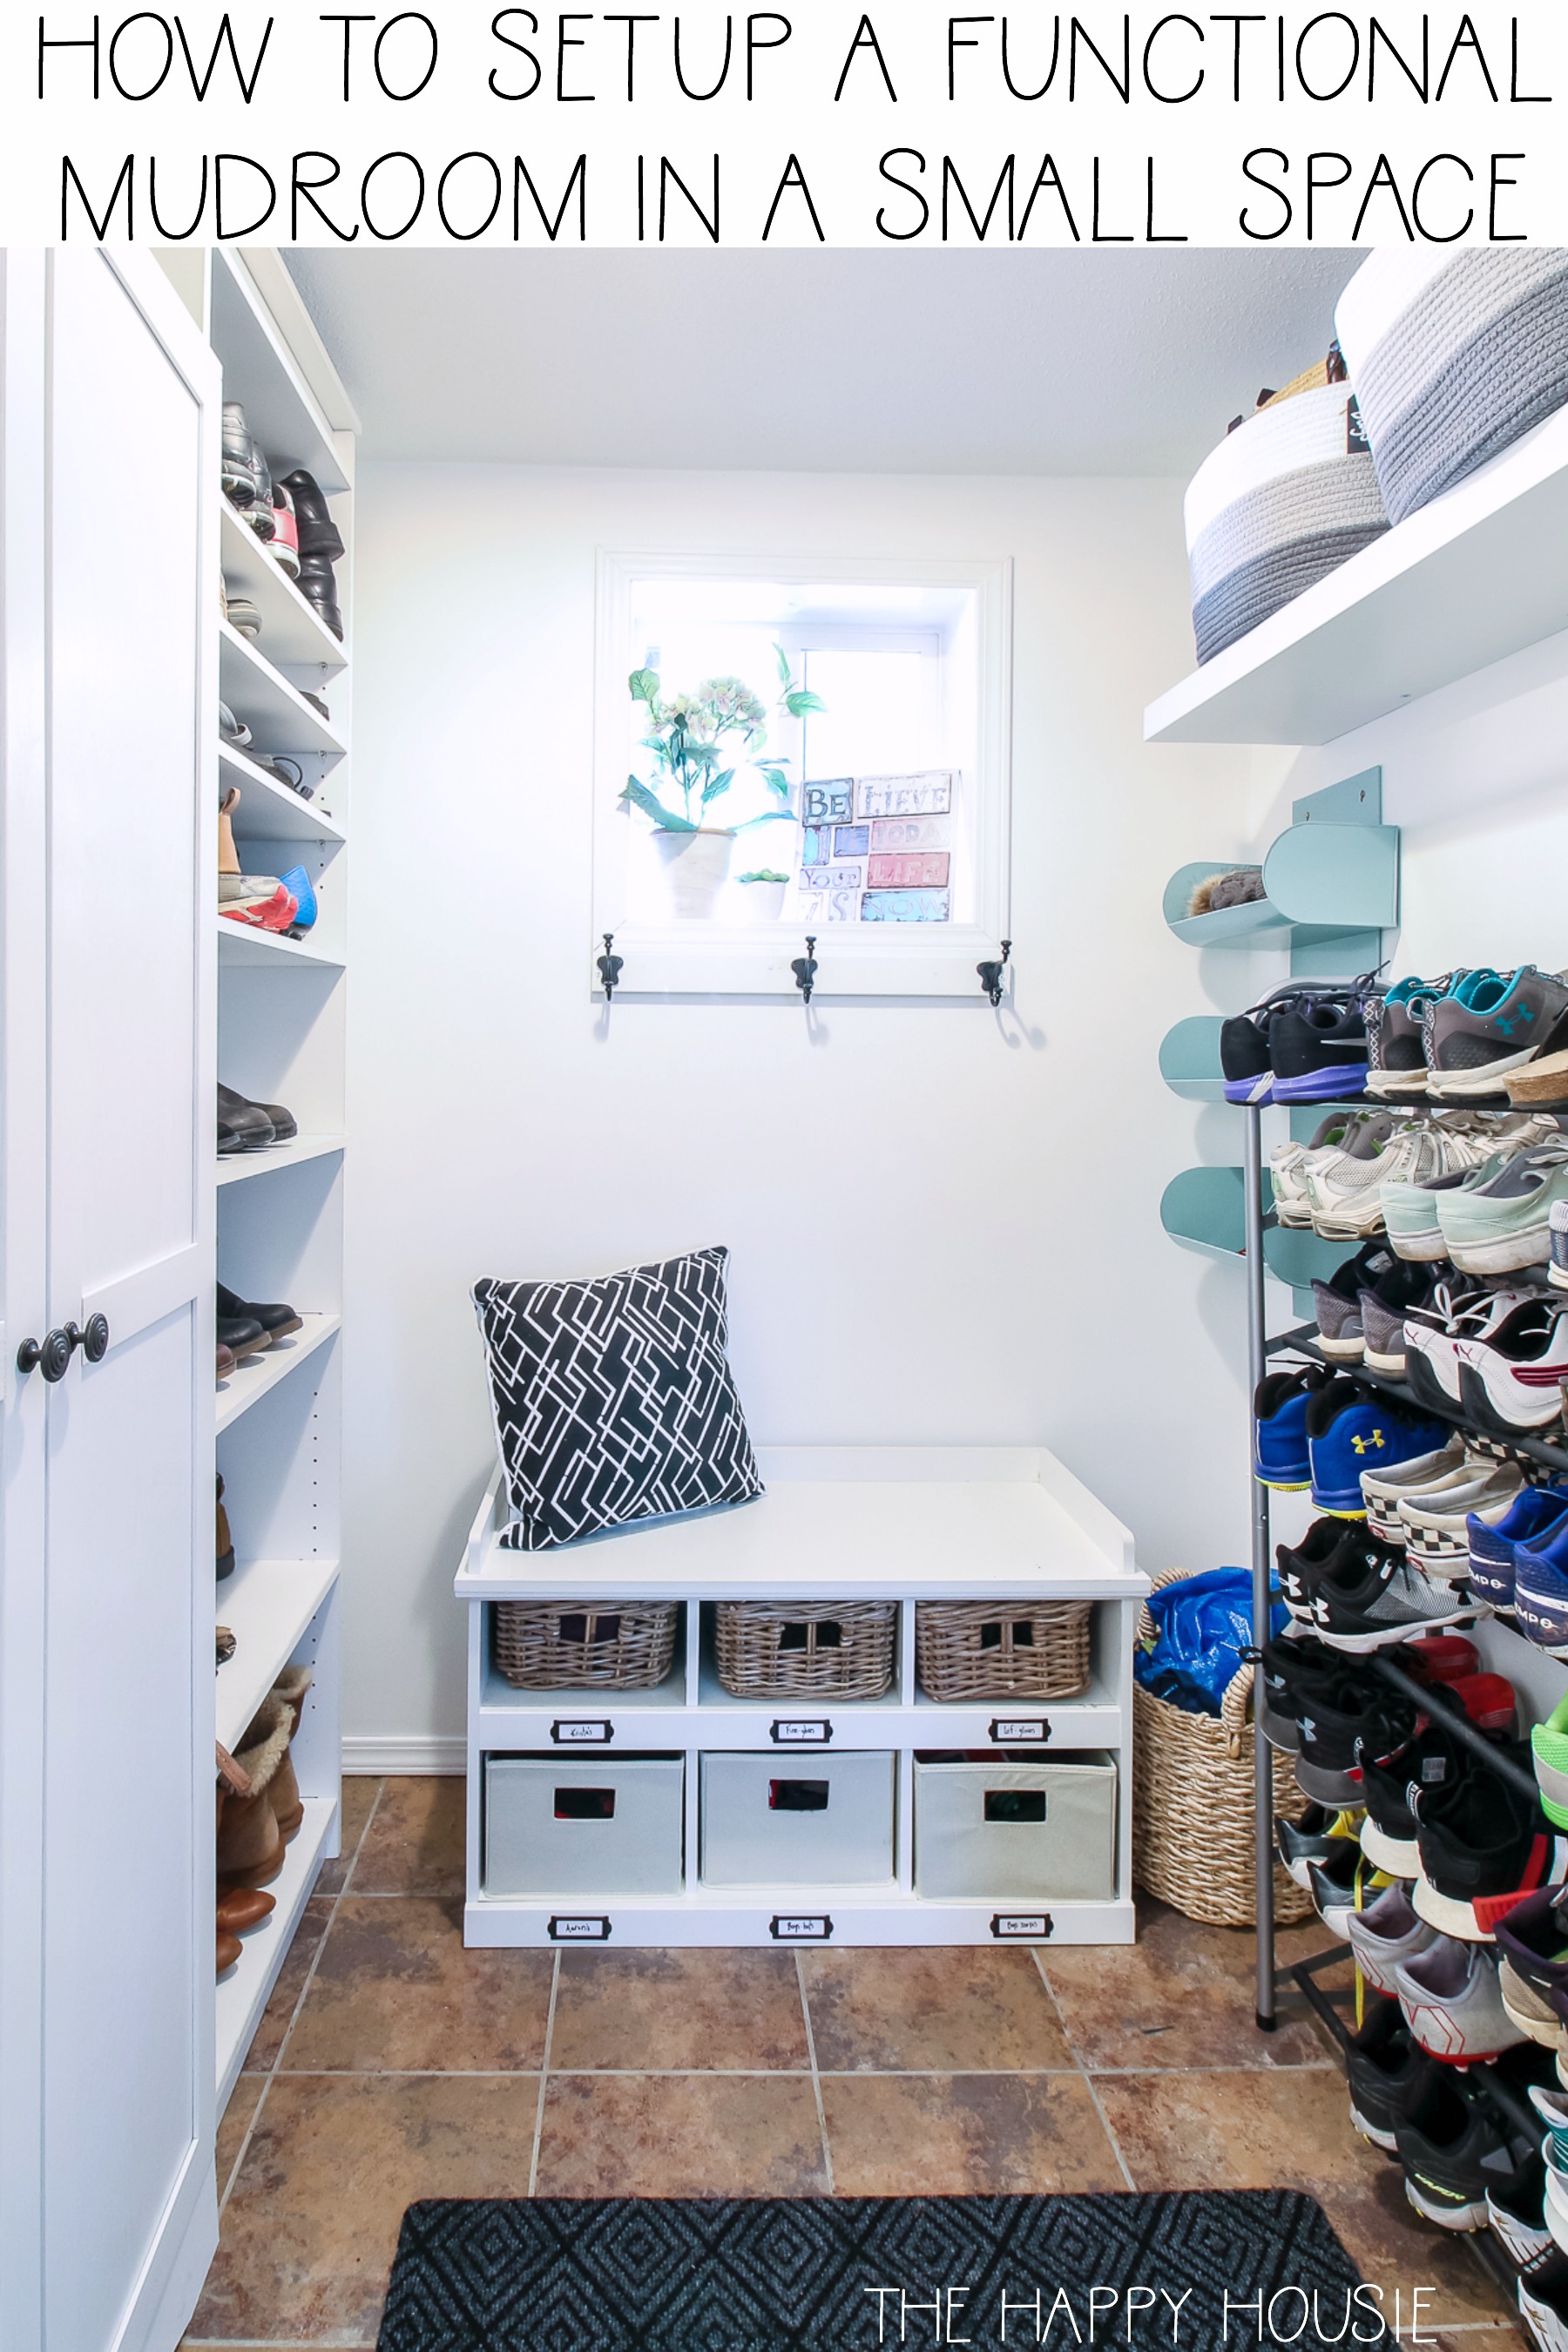 Verwonderlijk How to Setup a Functional Mudroom in a Small Space | The Happy Housie WZ-37